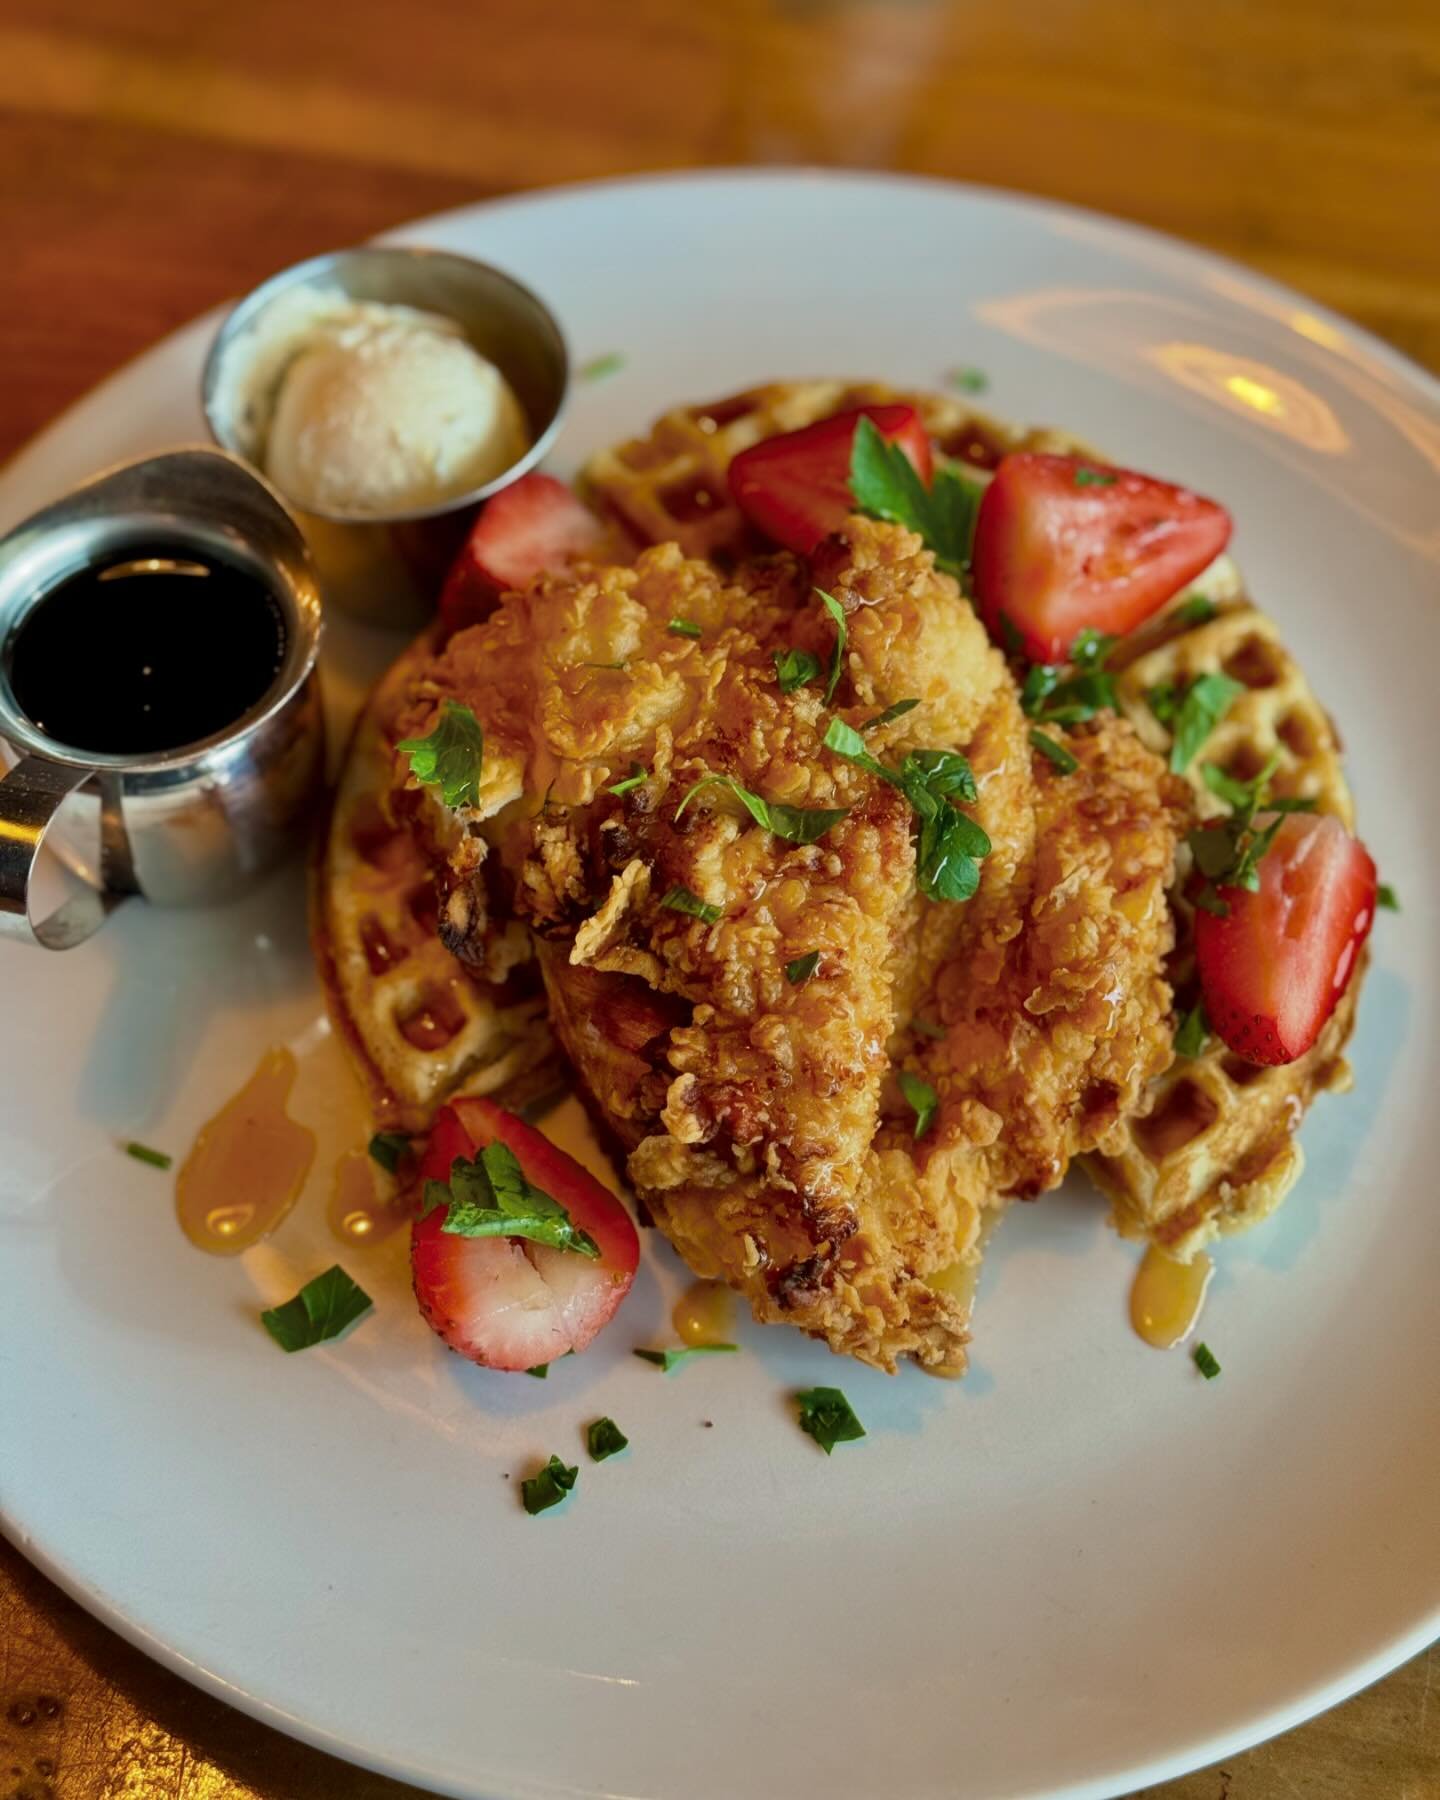 This weekend we are featuring Buttermilk Chicken + Waffles with a Hot Honey Drizzle. 🧇🍗🍯

#chickenandwaffles #hothoney #lakehighlands #dallasdining #lheats #breakfastfordinner #sweetandsavory #whiterocklake #eastdallas #dallasfoodie #fingerlicking